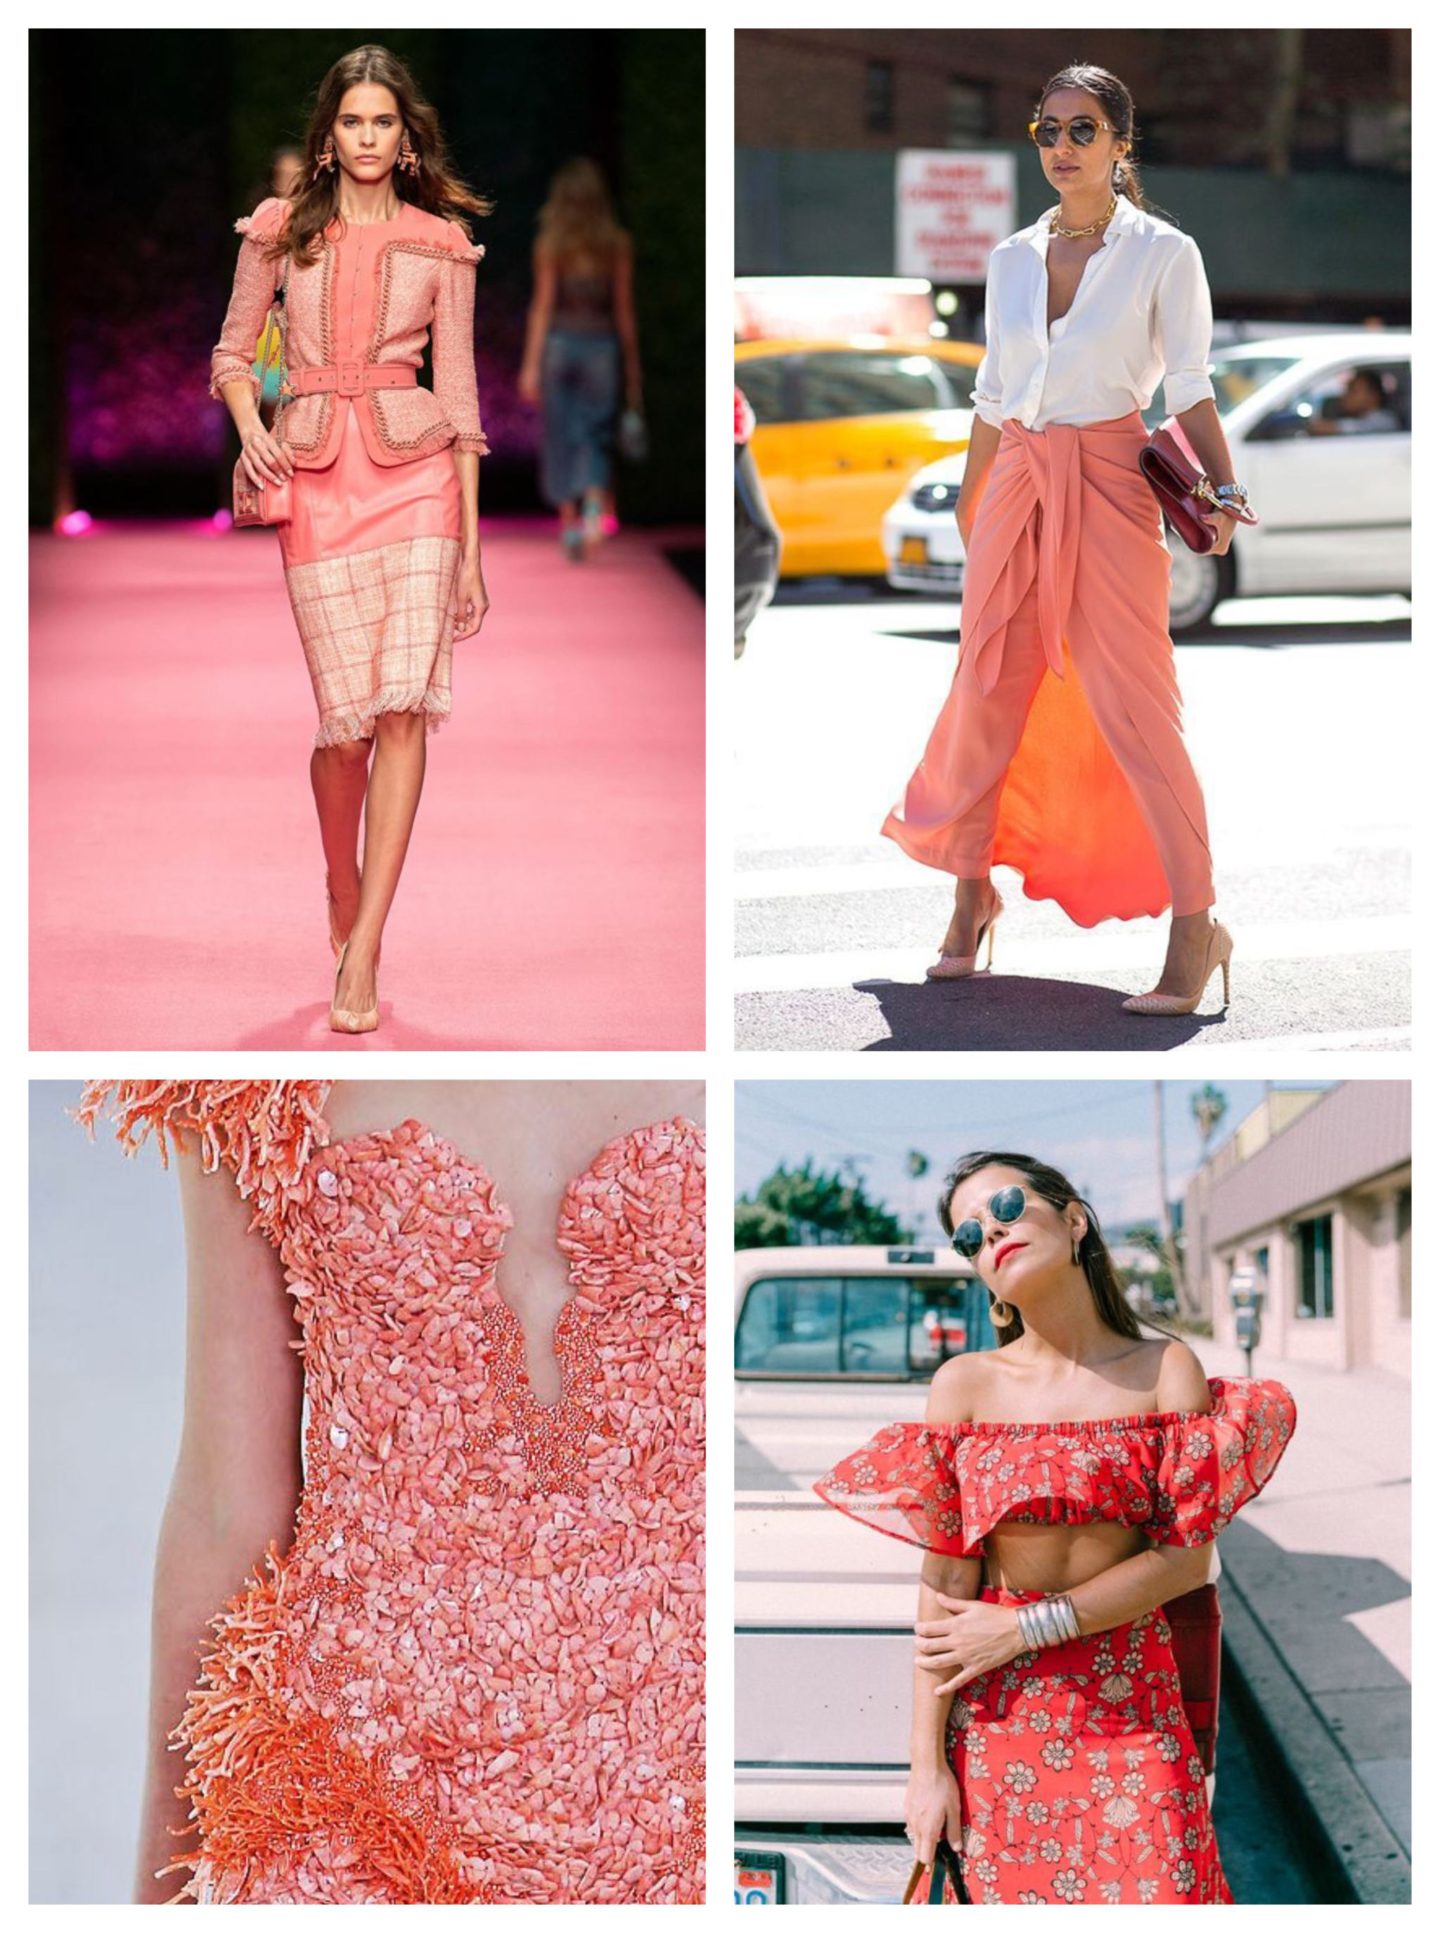 Dallas fashion blogger shares how to add Pantone's color of the year, living coral, into your life